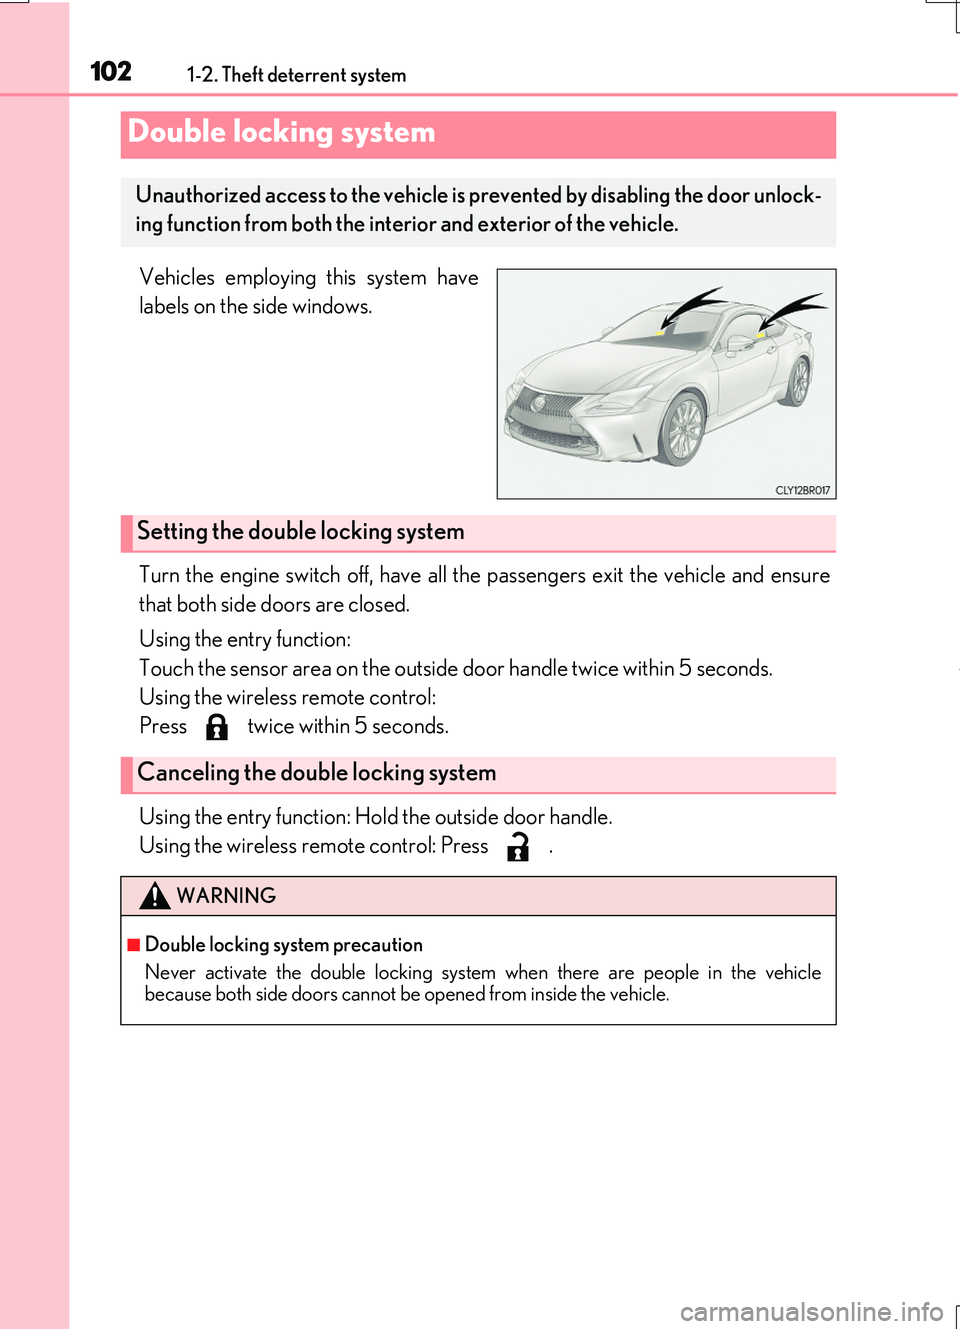 LEXUS RC200T 2017  Owners Manual 1021-2. Theft deterrent system
RC200t_RC F_EE(OM24728E)
Vehicles employing this system have 
labels on the side windows. 
Turn the engine switch off, have all the passengers exit the vehicle and ensur